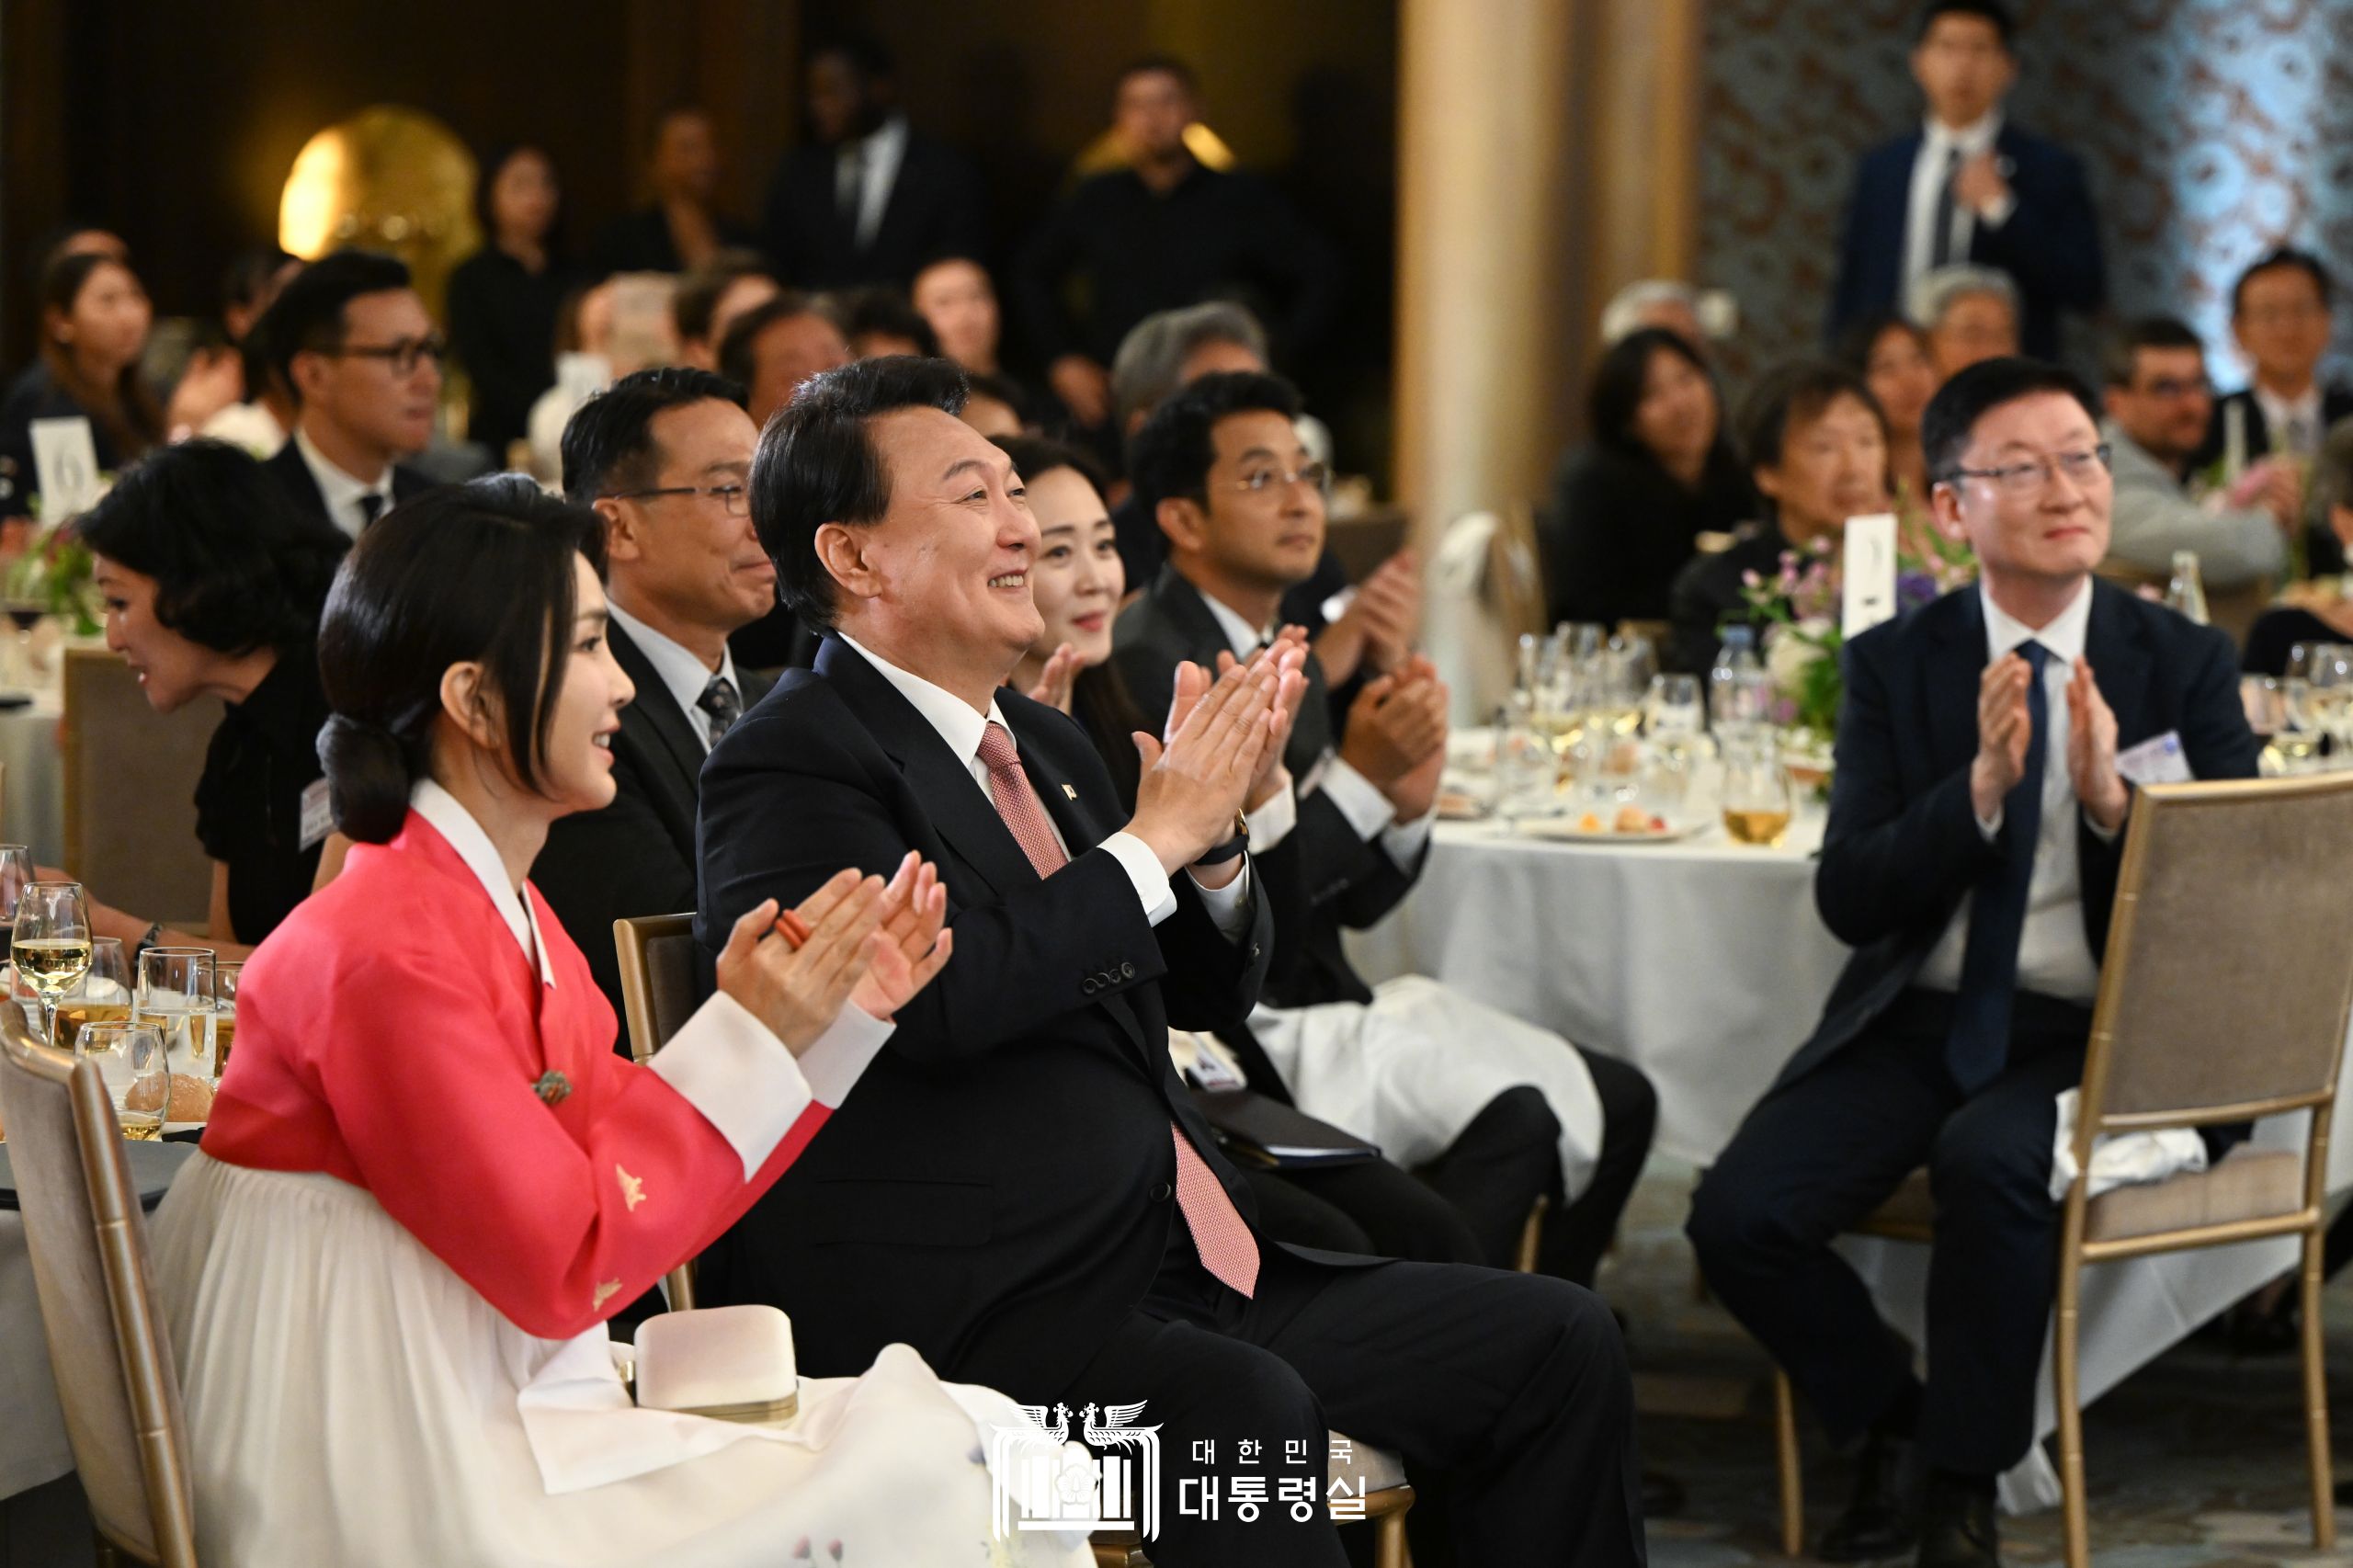 President Yoon Suk Yeol and first lady Kim Keon Hee on June 19 clap at a performance during a meeting of ethnic Koreans in Paris.